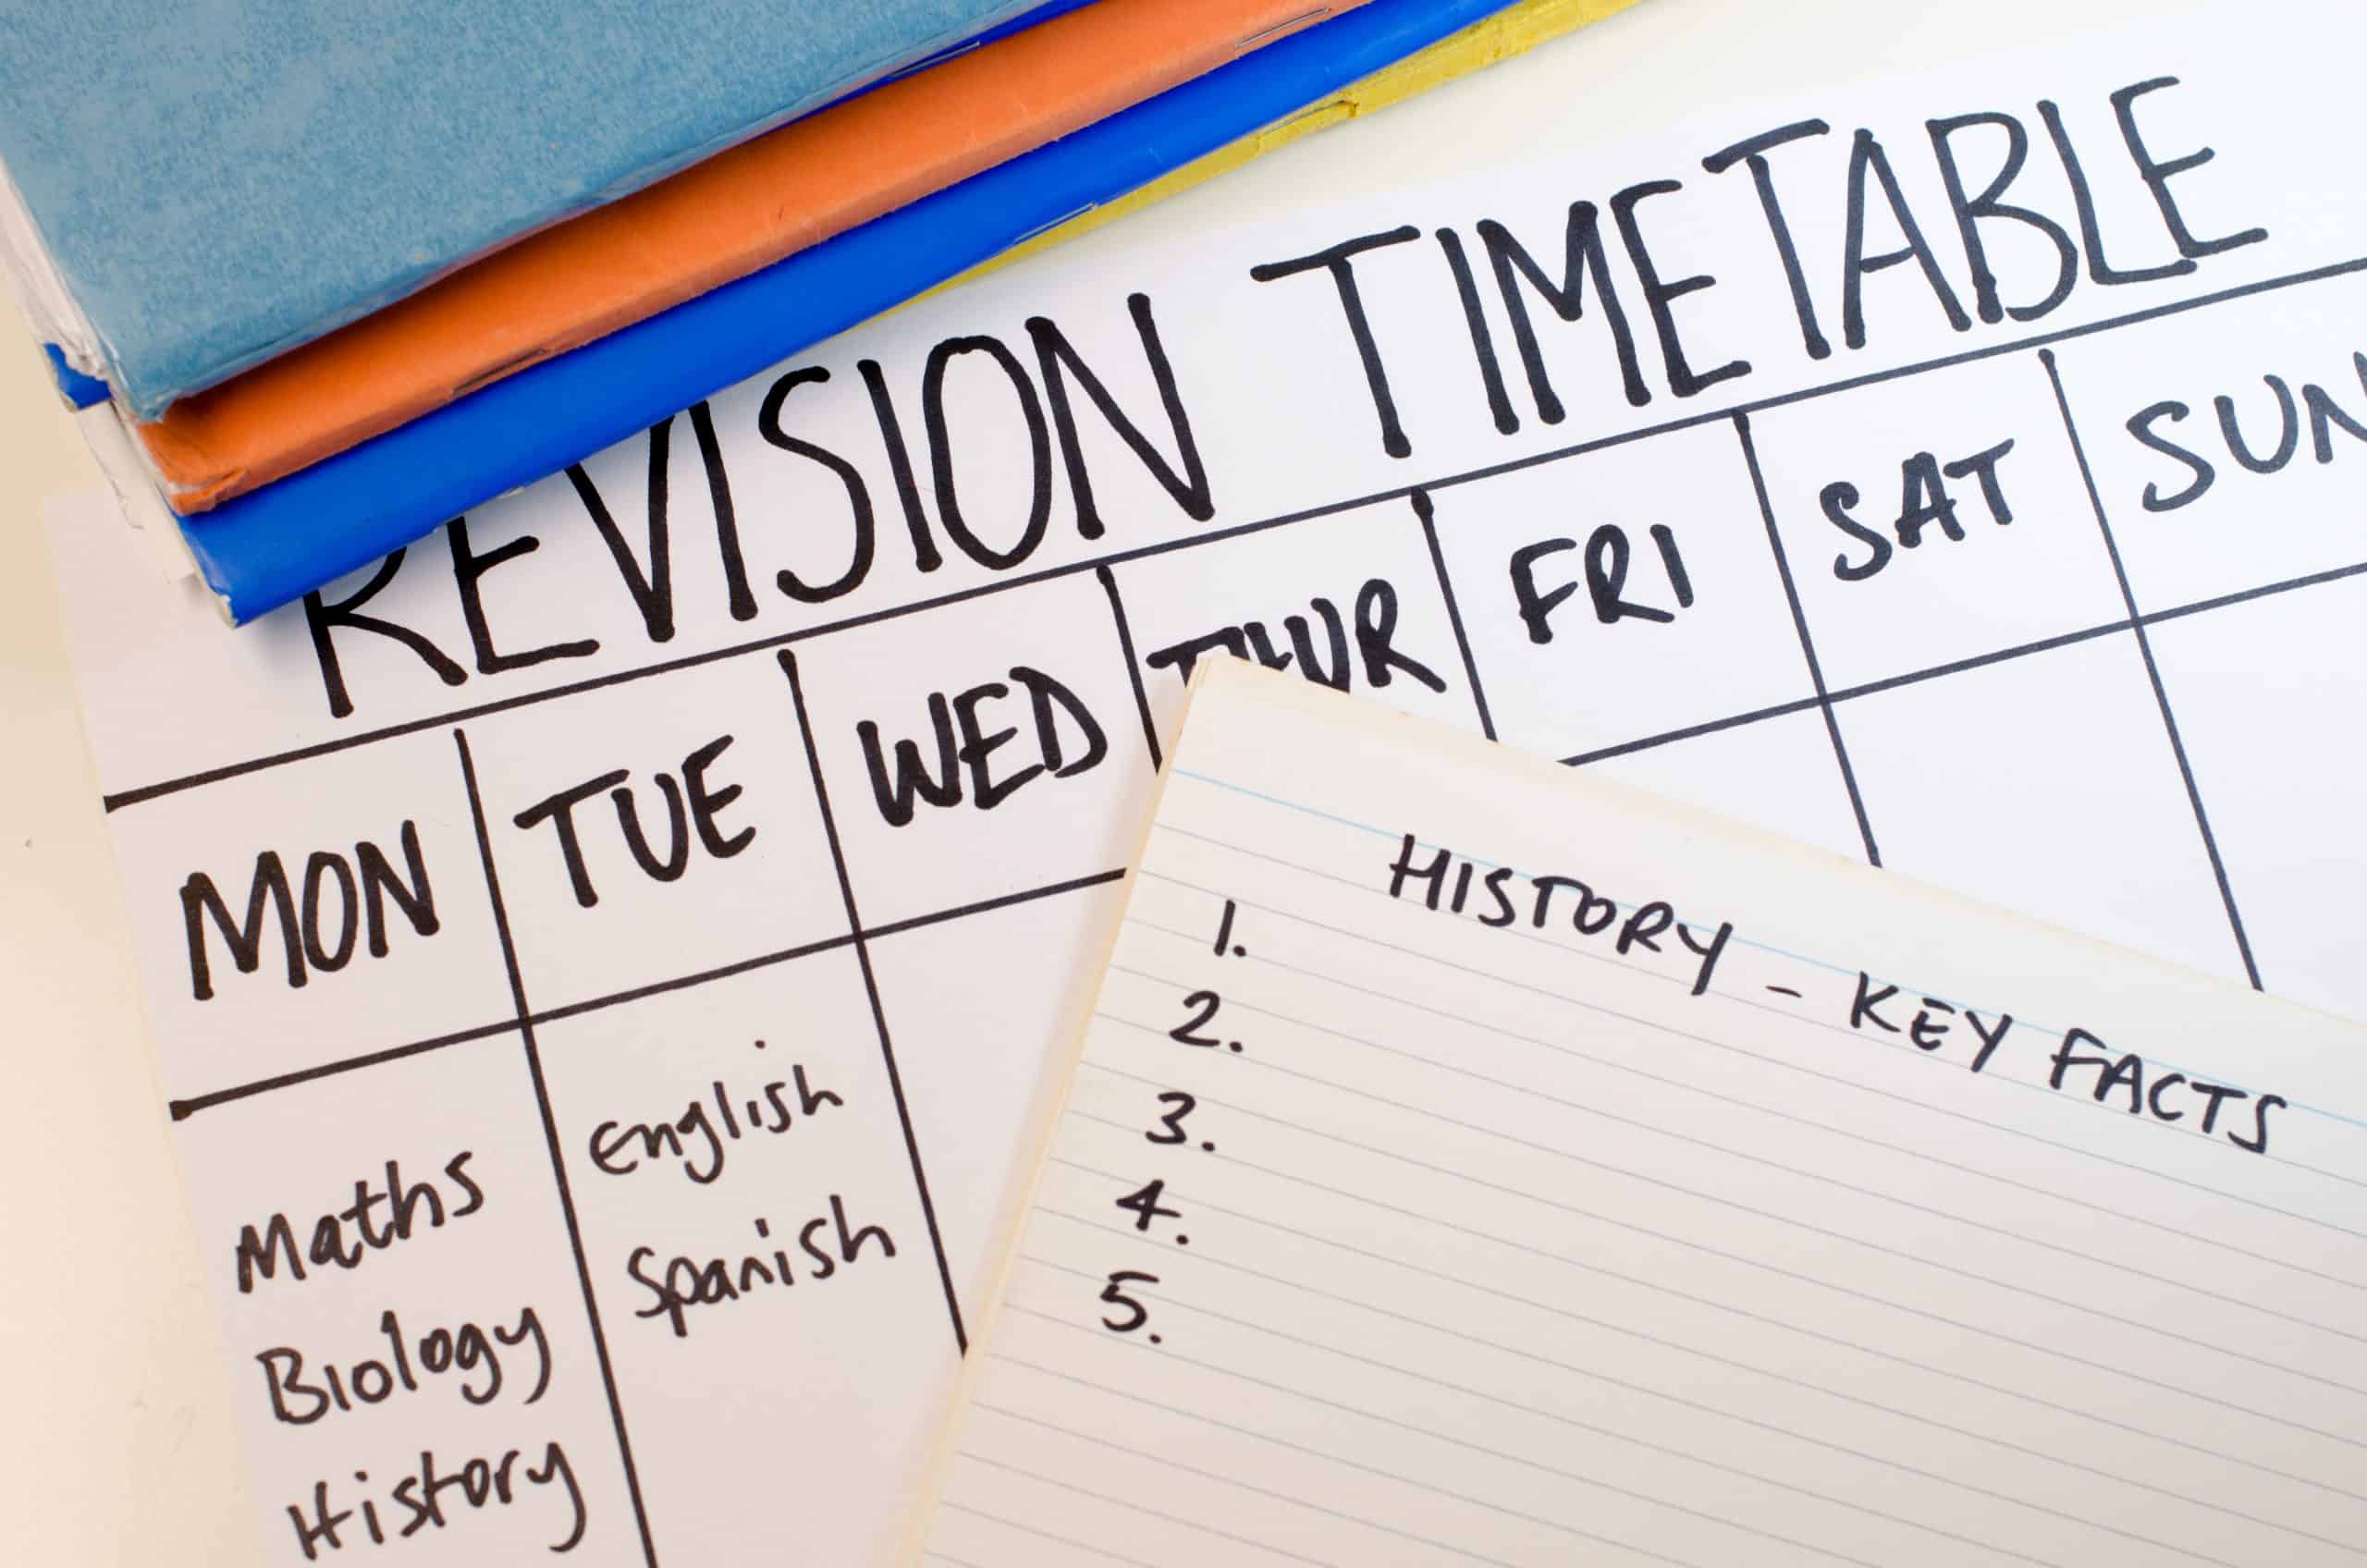 A weekly revision timetable.